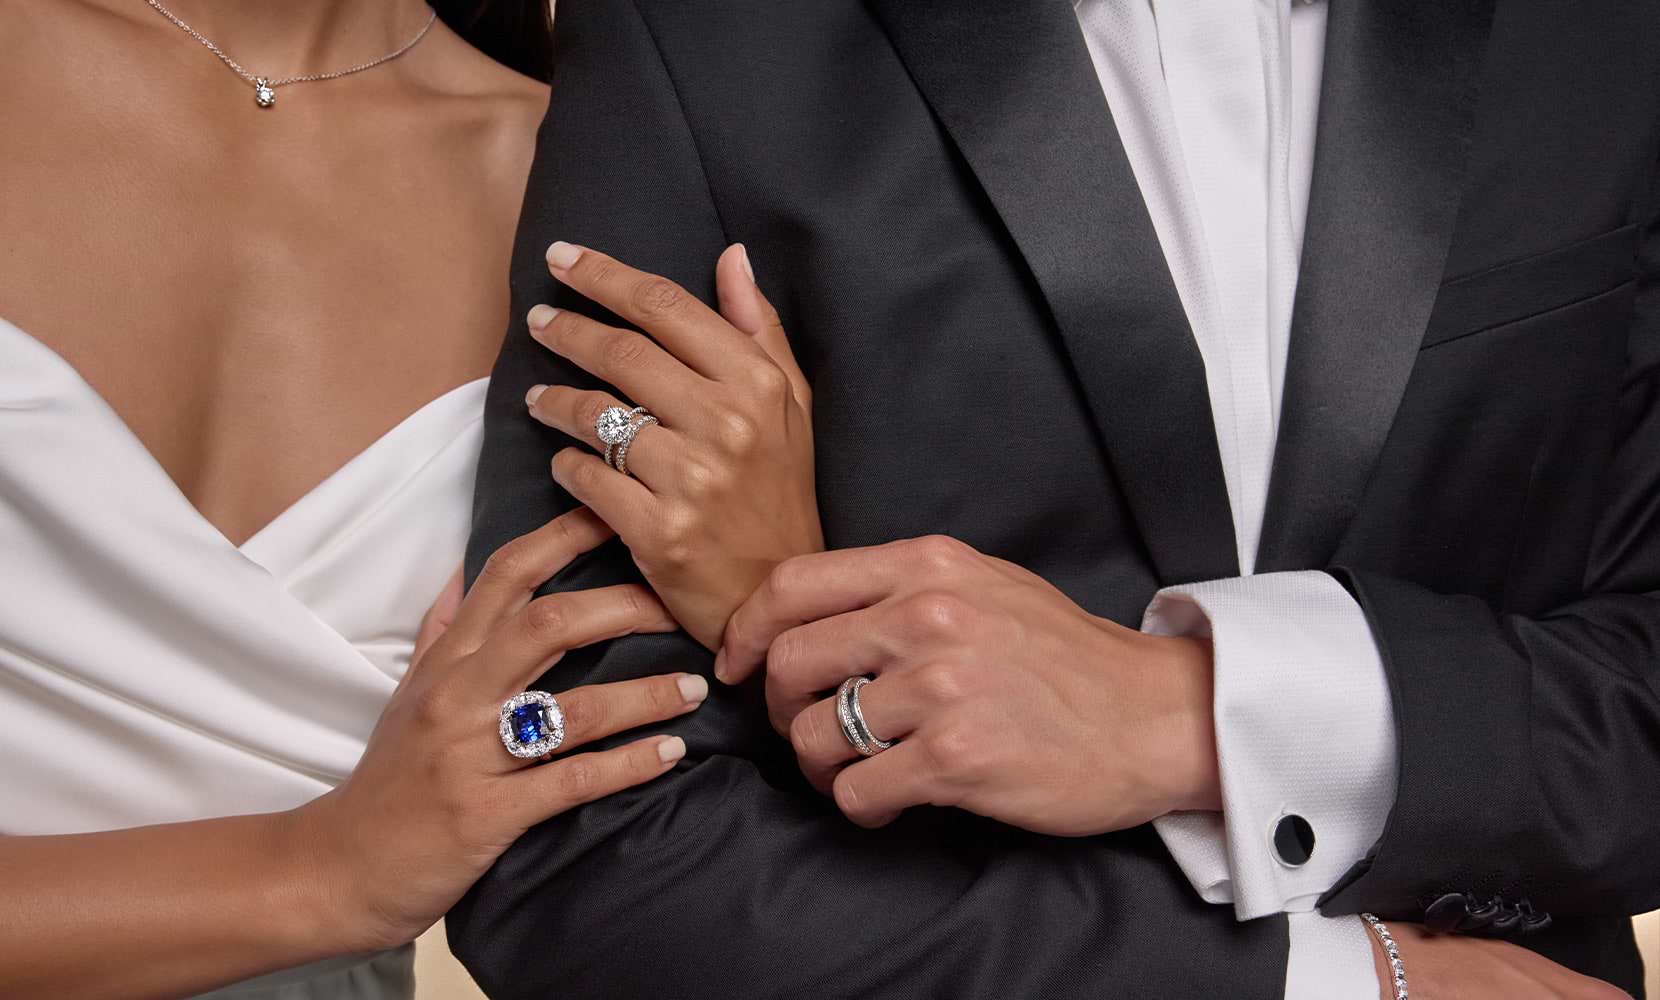 Image of intertwined hands of a bride and groom featuring a diamond pendant, fashion ring, eternity band and engagement ring on the bride's hands.The groom's hand features one men's wedding band. 